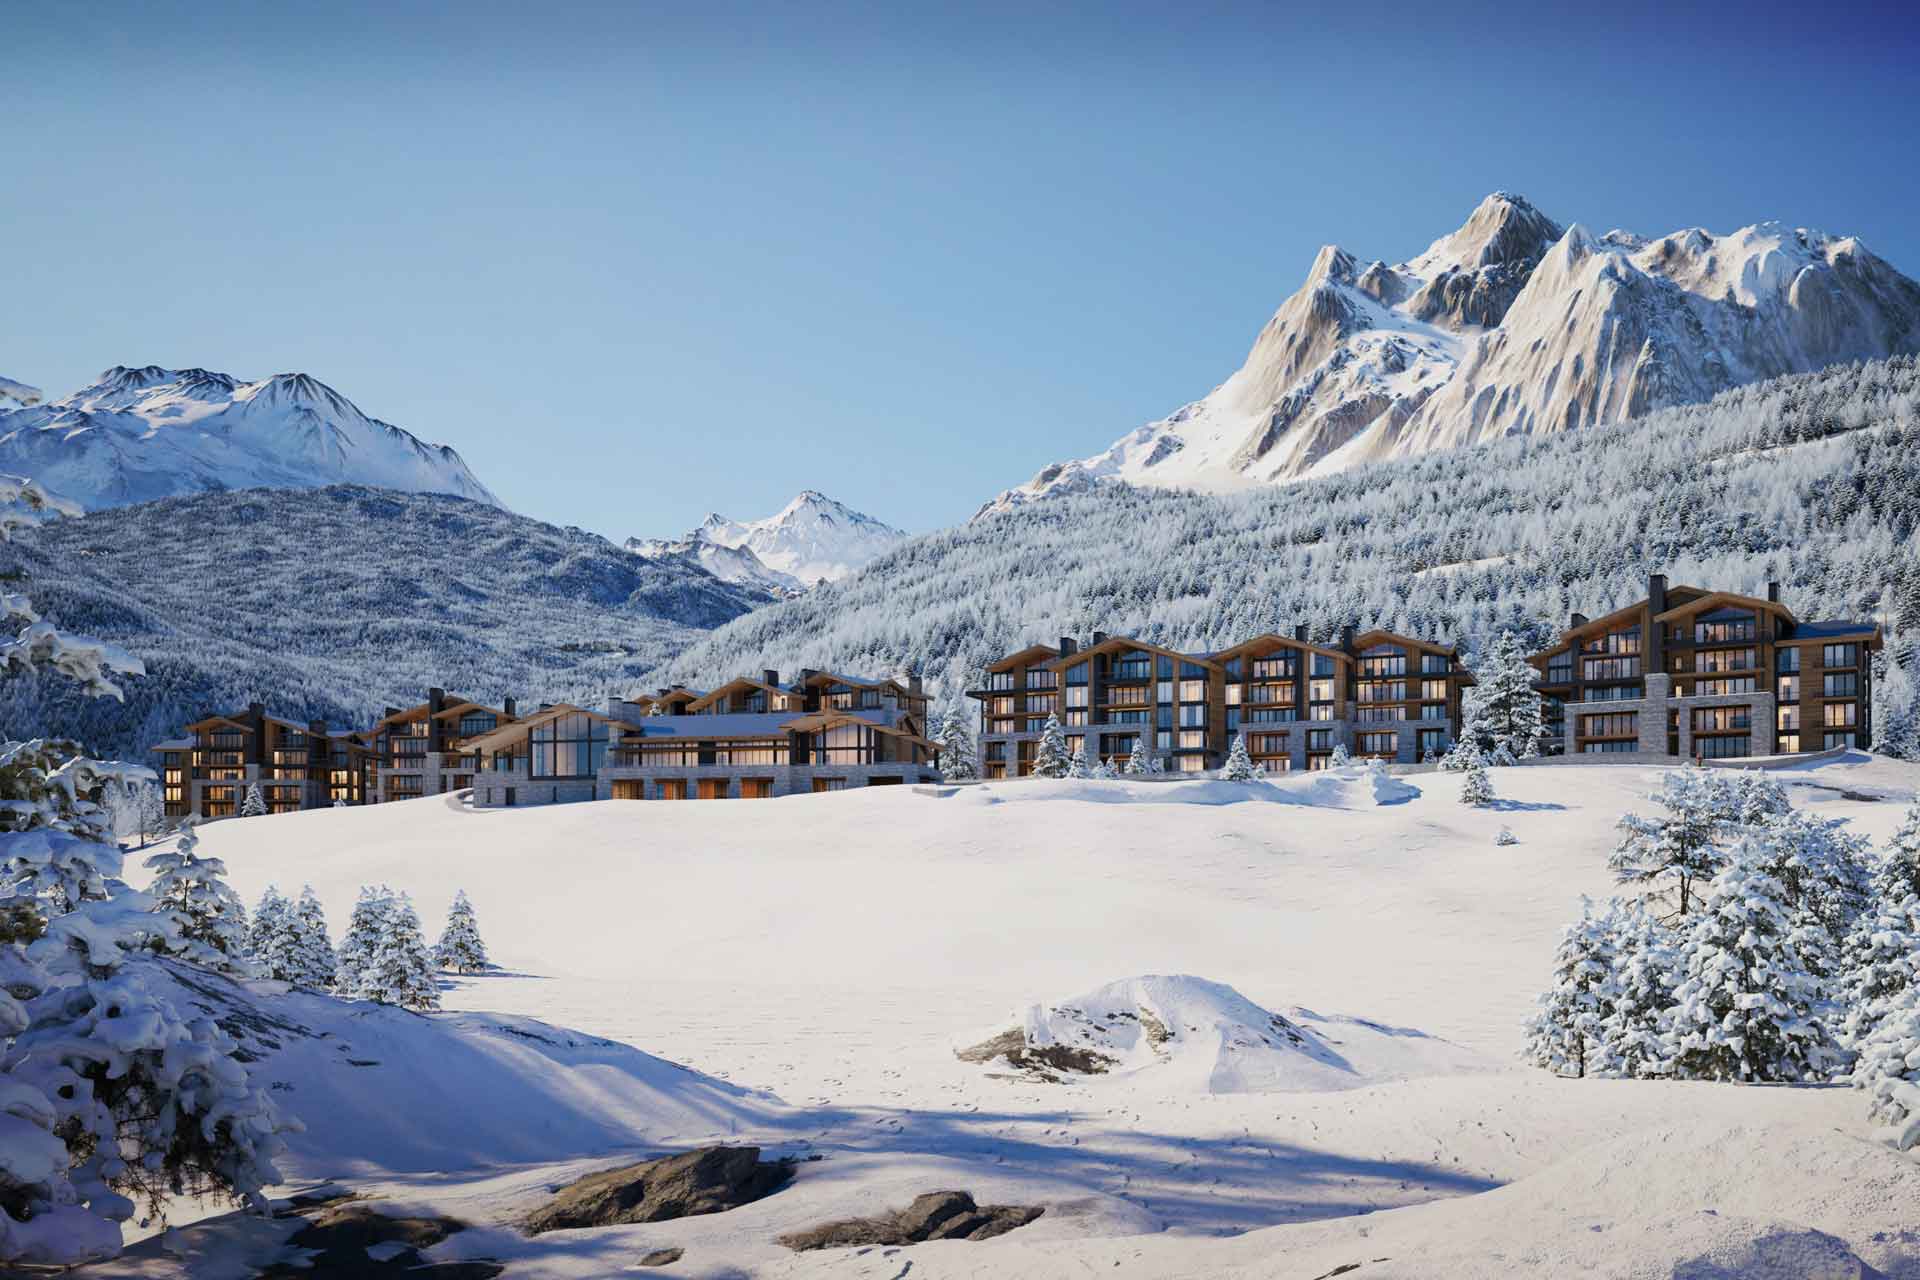 Are These The Dreamiest Ski Chalets Around?